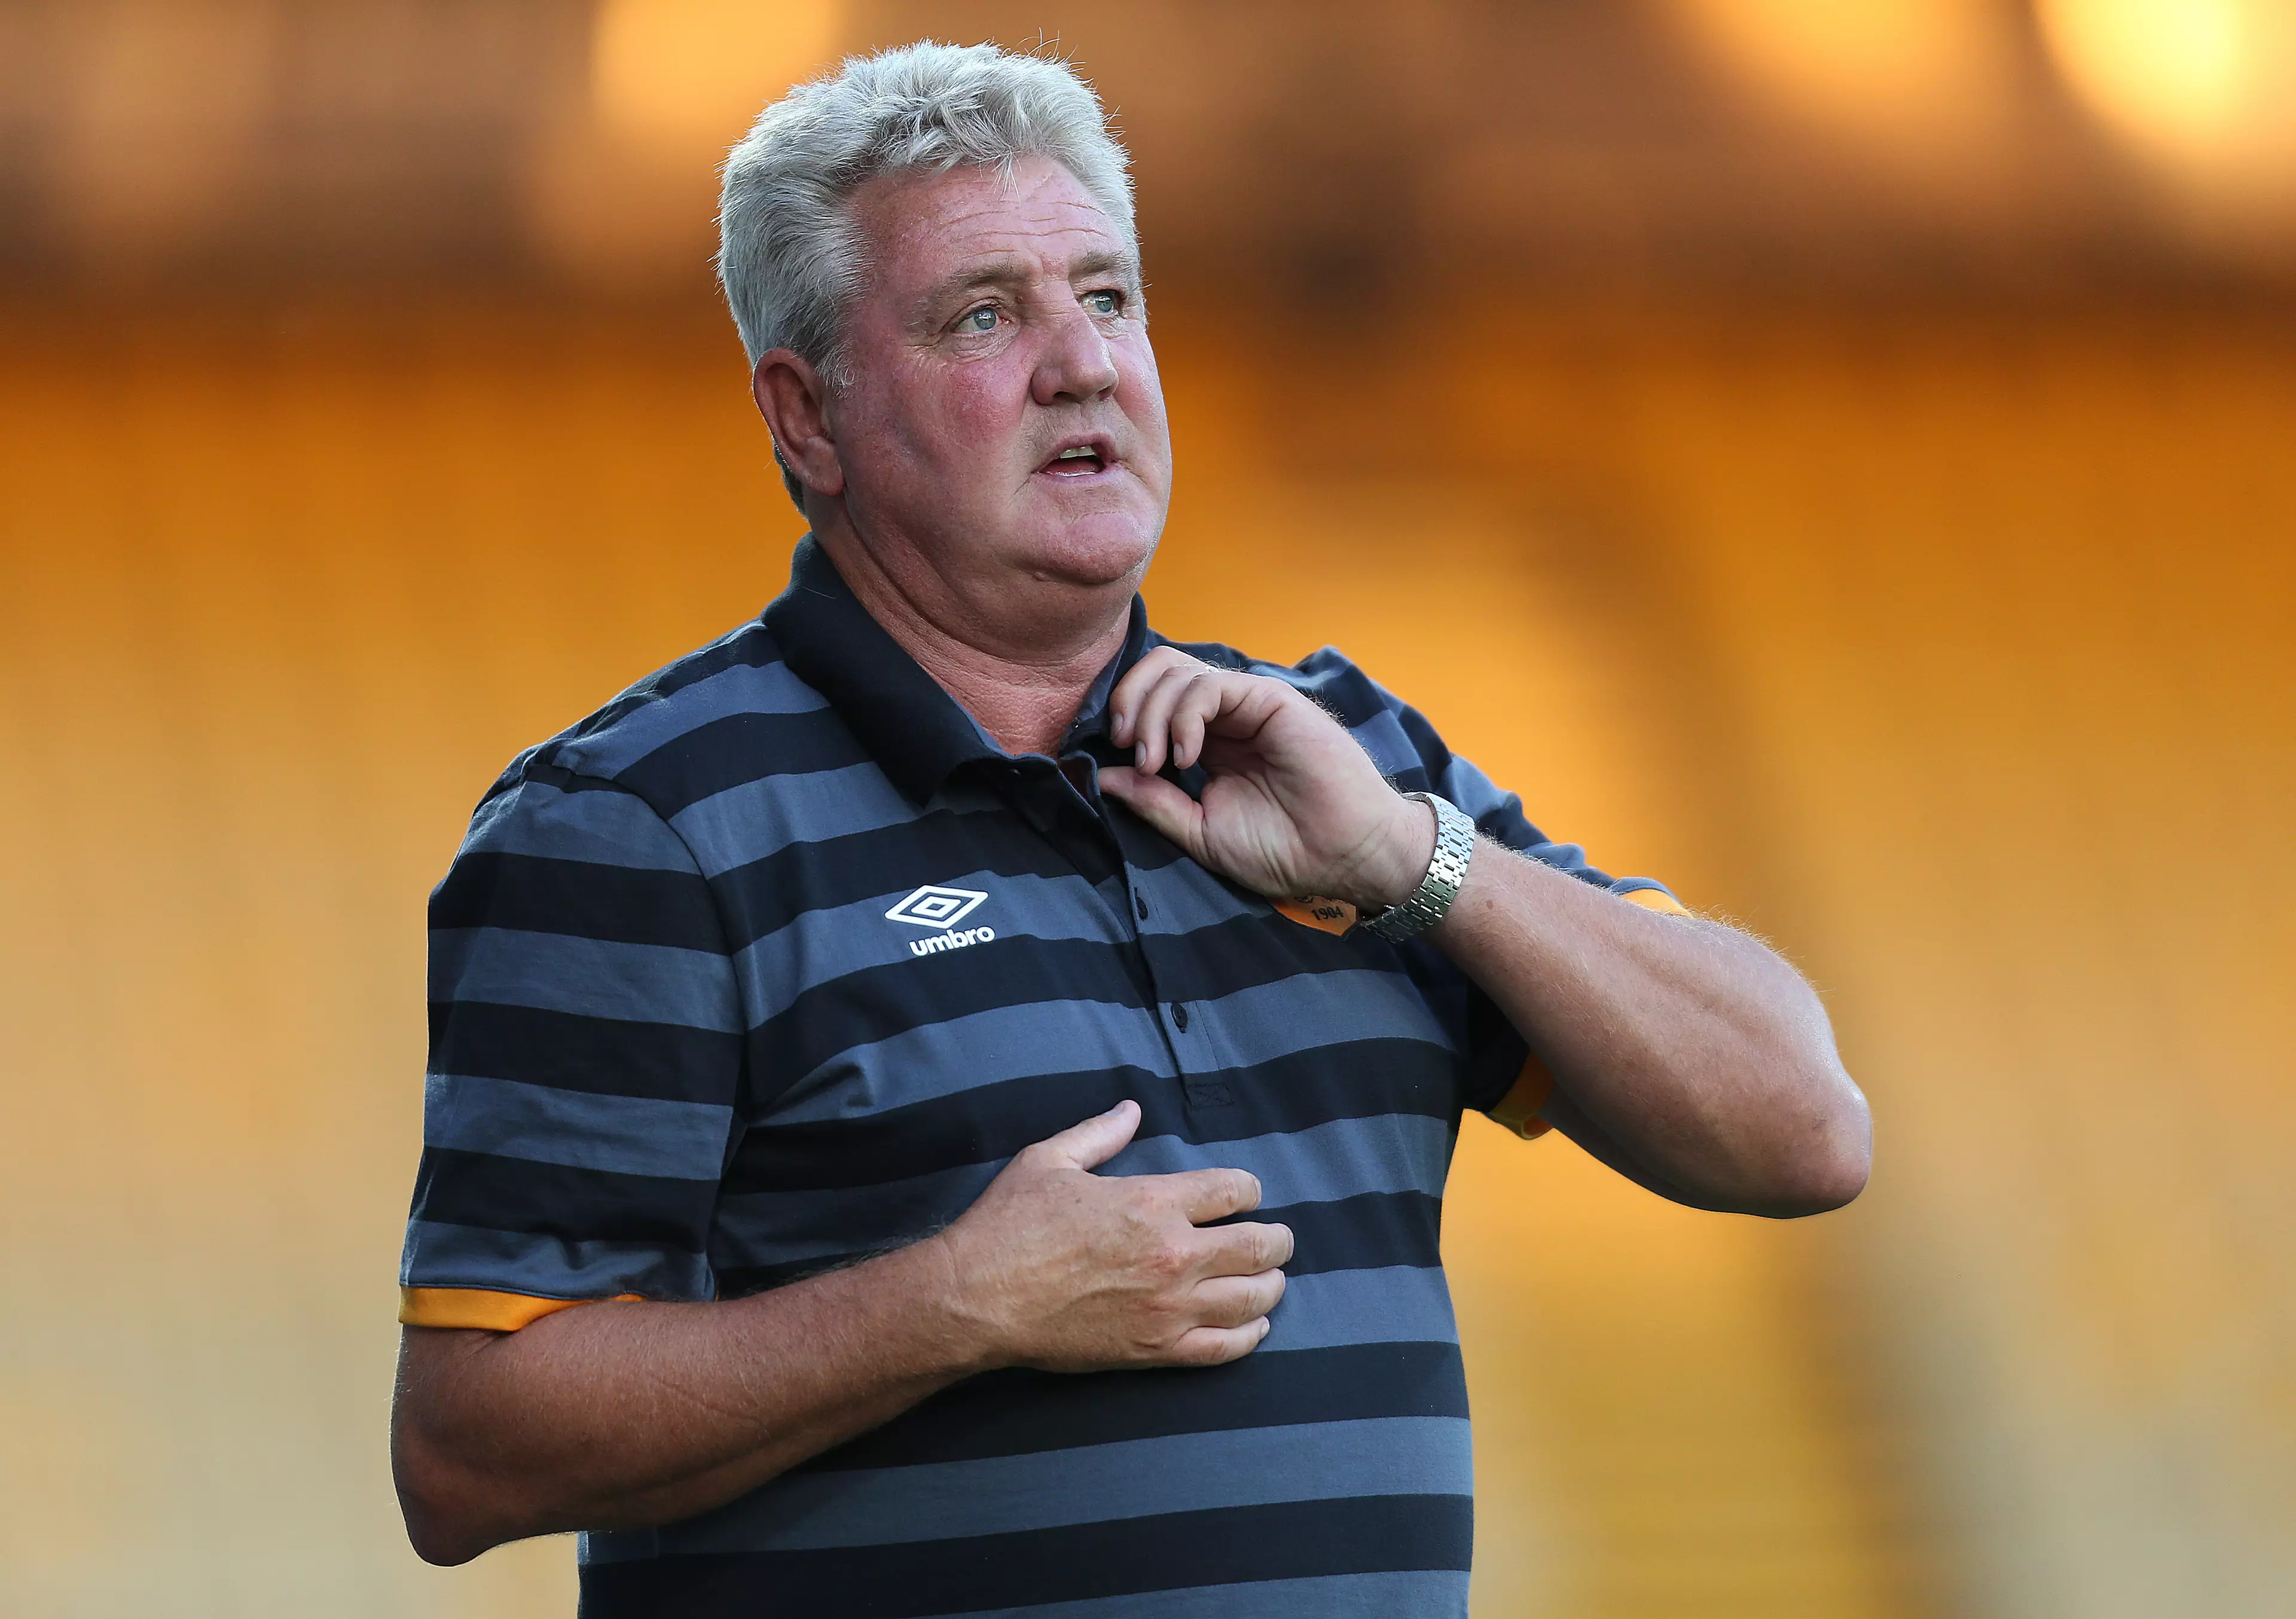 Fans Are Stunned By Steve Bruce's Weight Loss